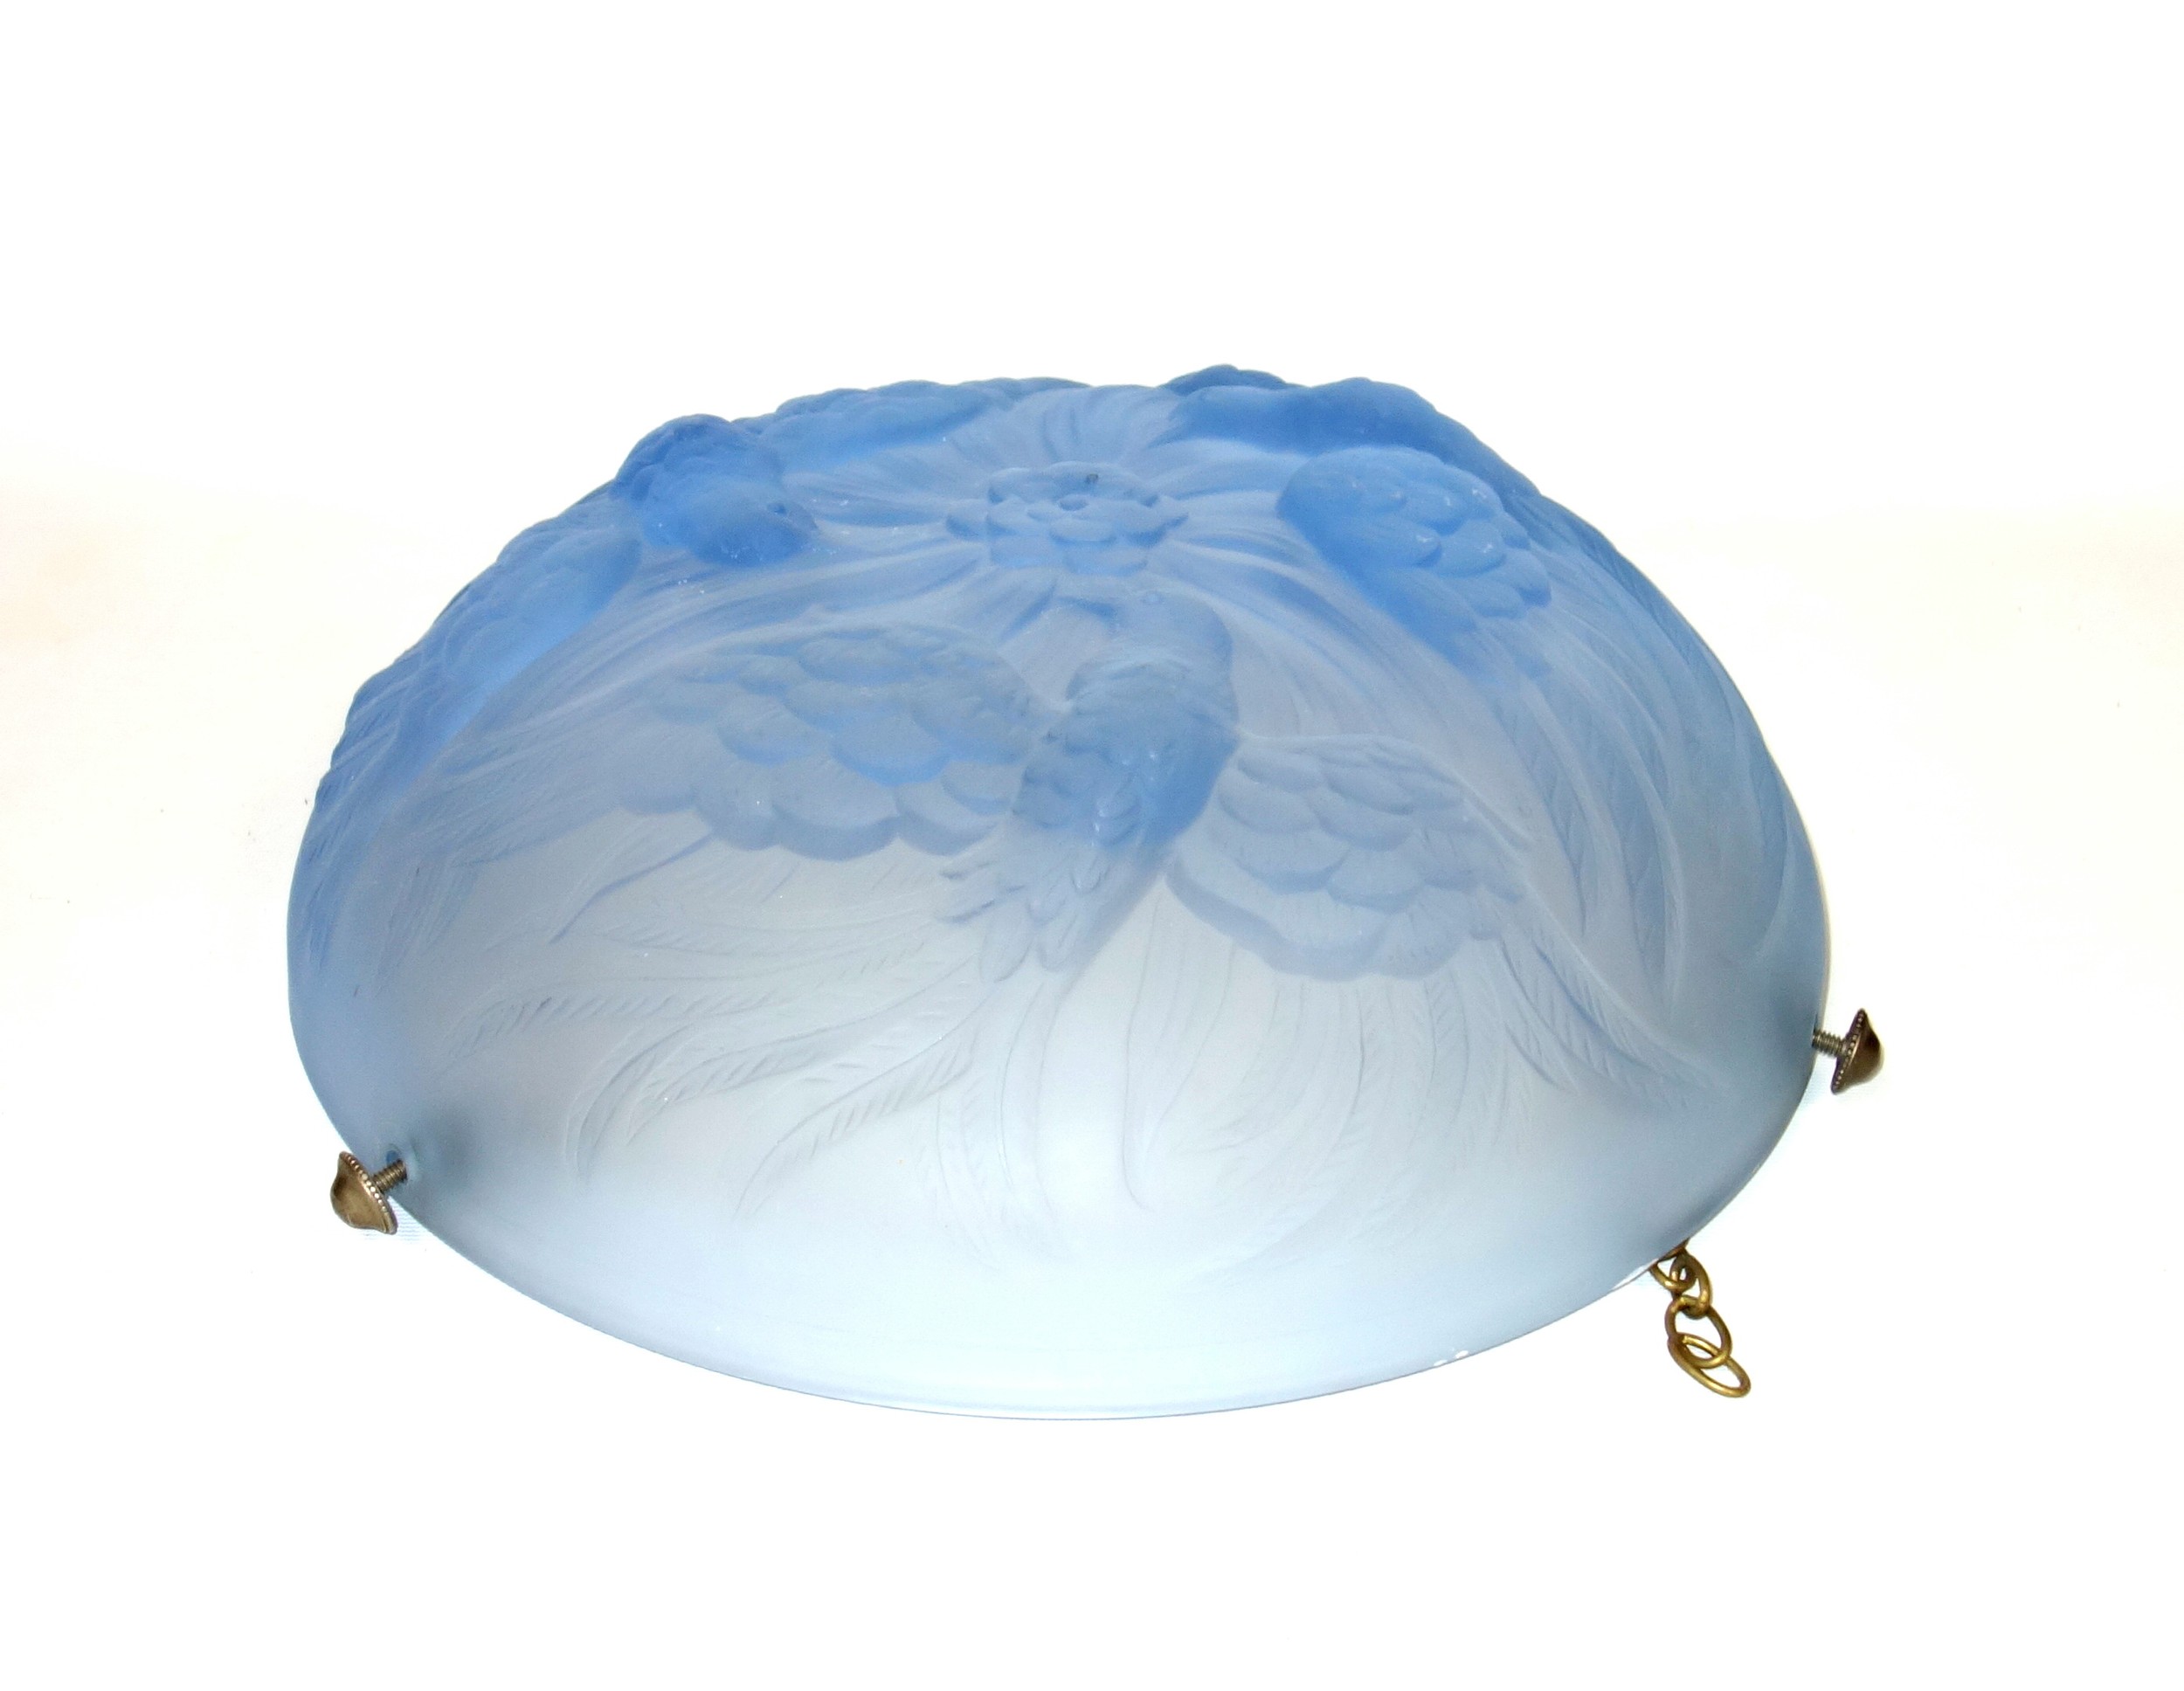 Art Deco blue frosted glass plafonnier with 3 moulded birds surrounding a central flower motif, - Image 5 of 6